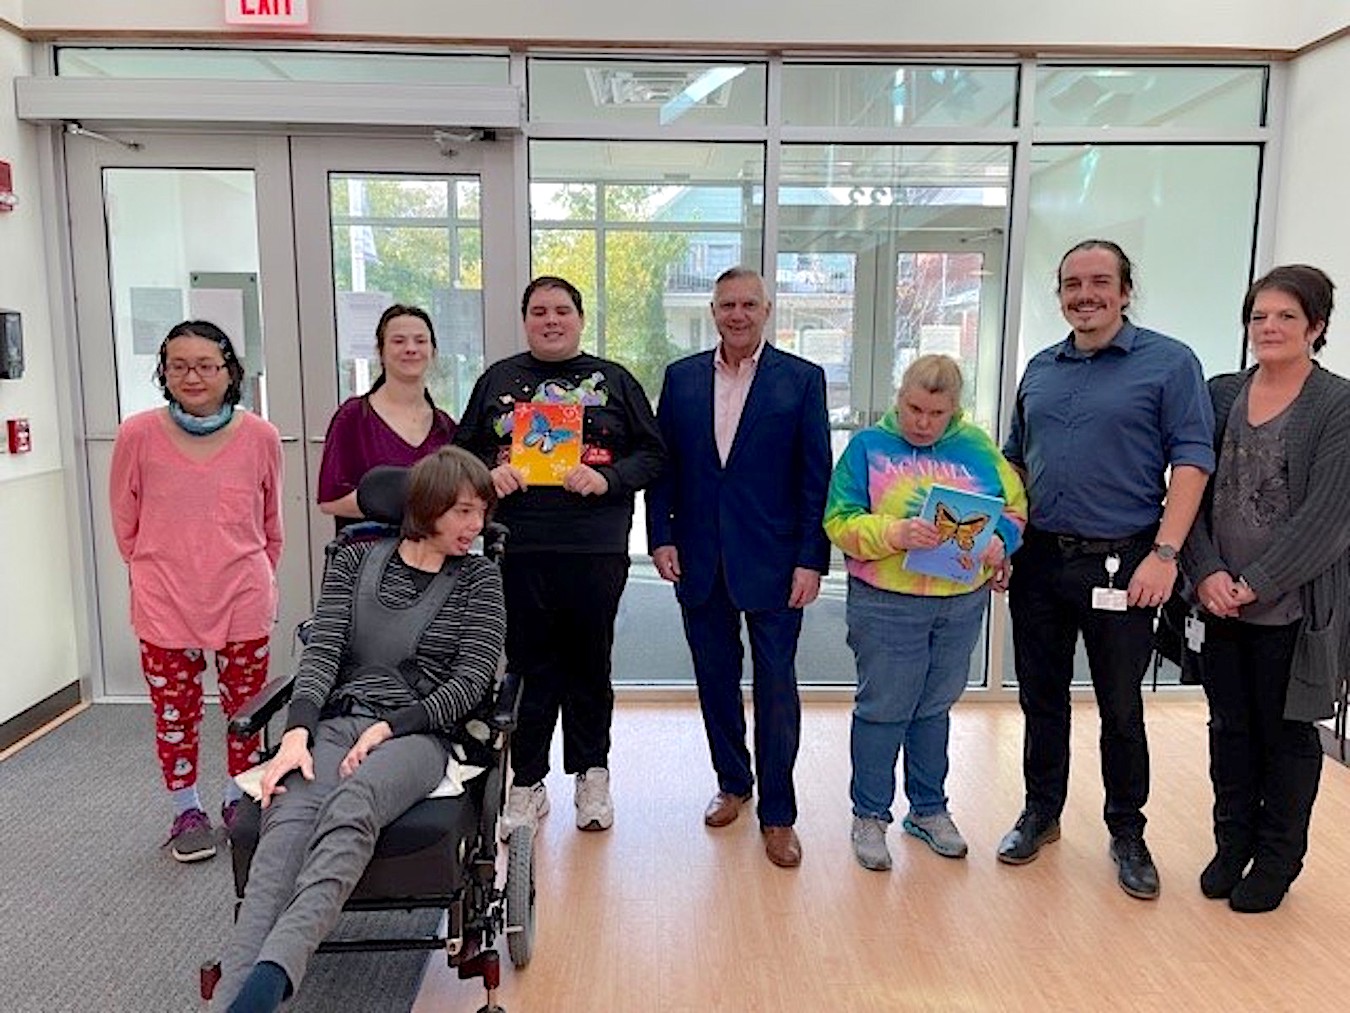 Pictured, from left: Nan; Jodie; Meghan; Mark, Joseph Ruffolo; Mackenzie; and Mike O'Shea, senior day supervisor, and Jill Magno, program director, for the People Inc. Artisan's Edge program.